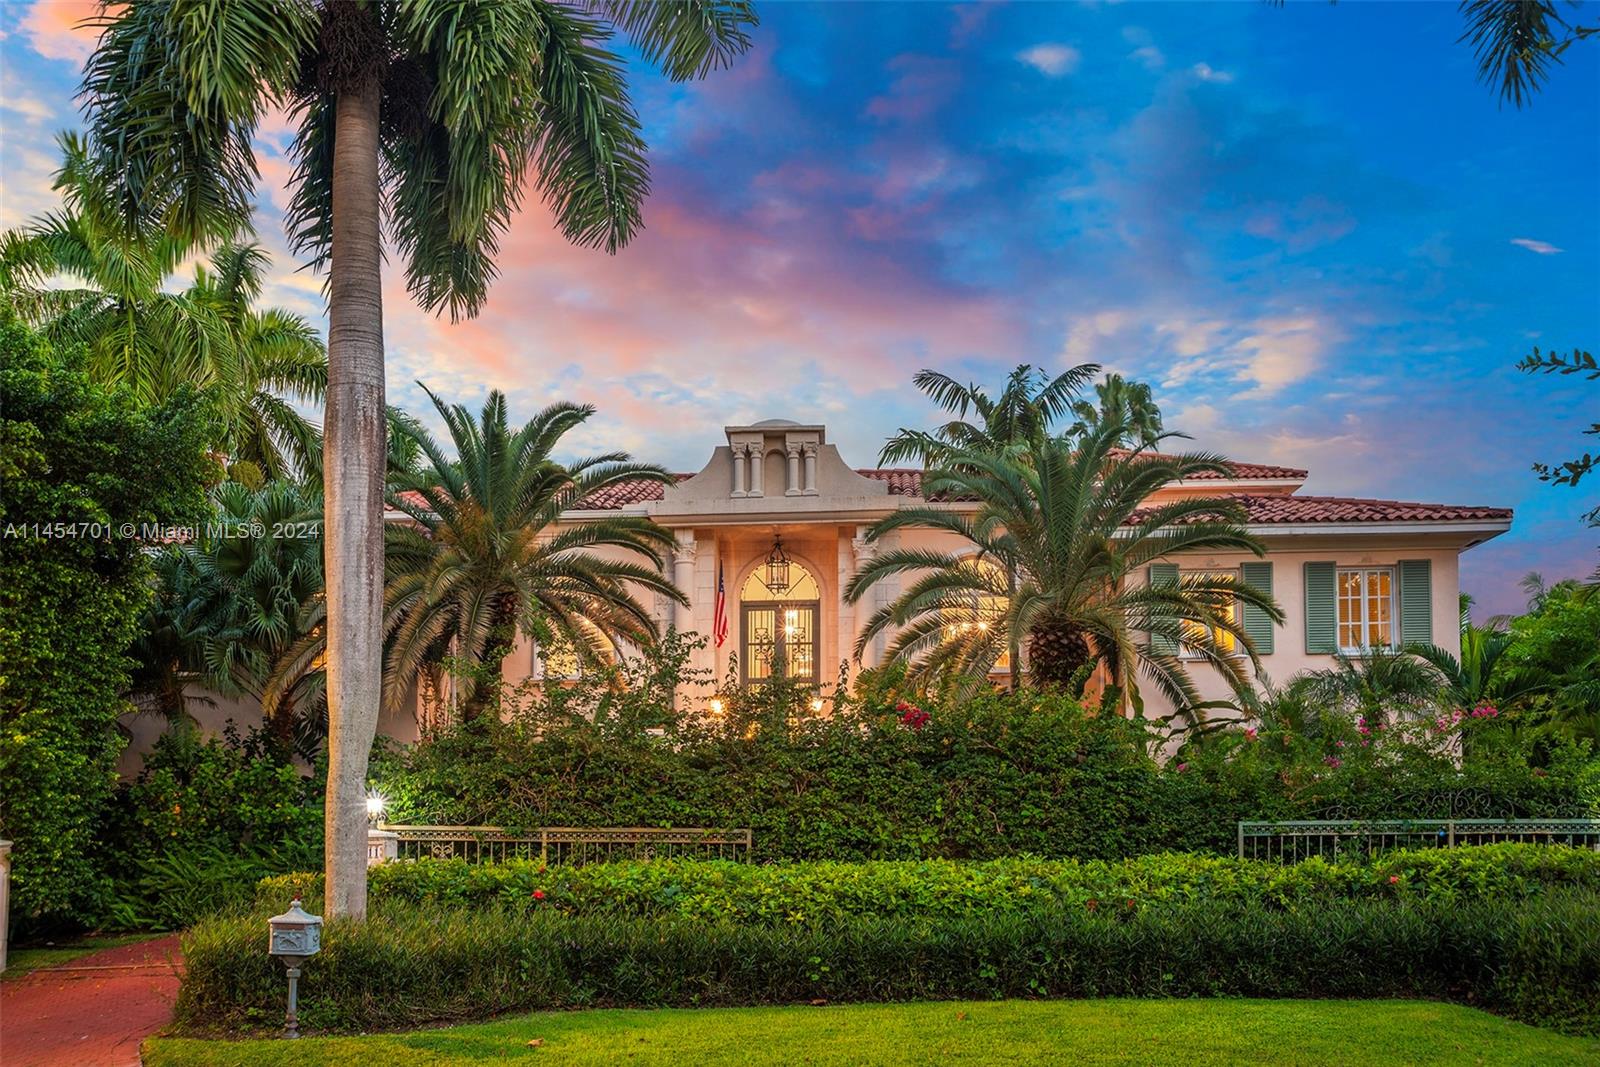 LOWEST PRICE PER SQ.FT. WATERFRONT HOME IN GUARD-GATED COCOPLUM! ONLY $966/SF! Exceptional estate nestled on an oversized corner 19,393 SF lot w/134' of water frontage & ocean access. This Italian mansion is oozing w/elegance & old world charm, offering 7BD & 9.5BA. The grand stairway entrance leads you to the foyer entry, interior courtyard, elegant interiors, sophisticated living areas & primary suite which has 2 private terraces & 2 walk-in closets. Entertainers will enjoy the numerous balconies, covered terrace w/summer kitchen & bar, resort-style pool, gorgeous fruit trees & huge downstairs patio running the full length of the home. Complete w/an elevator, 3-car garage, gym, ample storage & large party room + separate maids quarters (not included in the Sq.Ft.). MAX boat size: 35'.